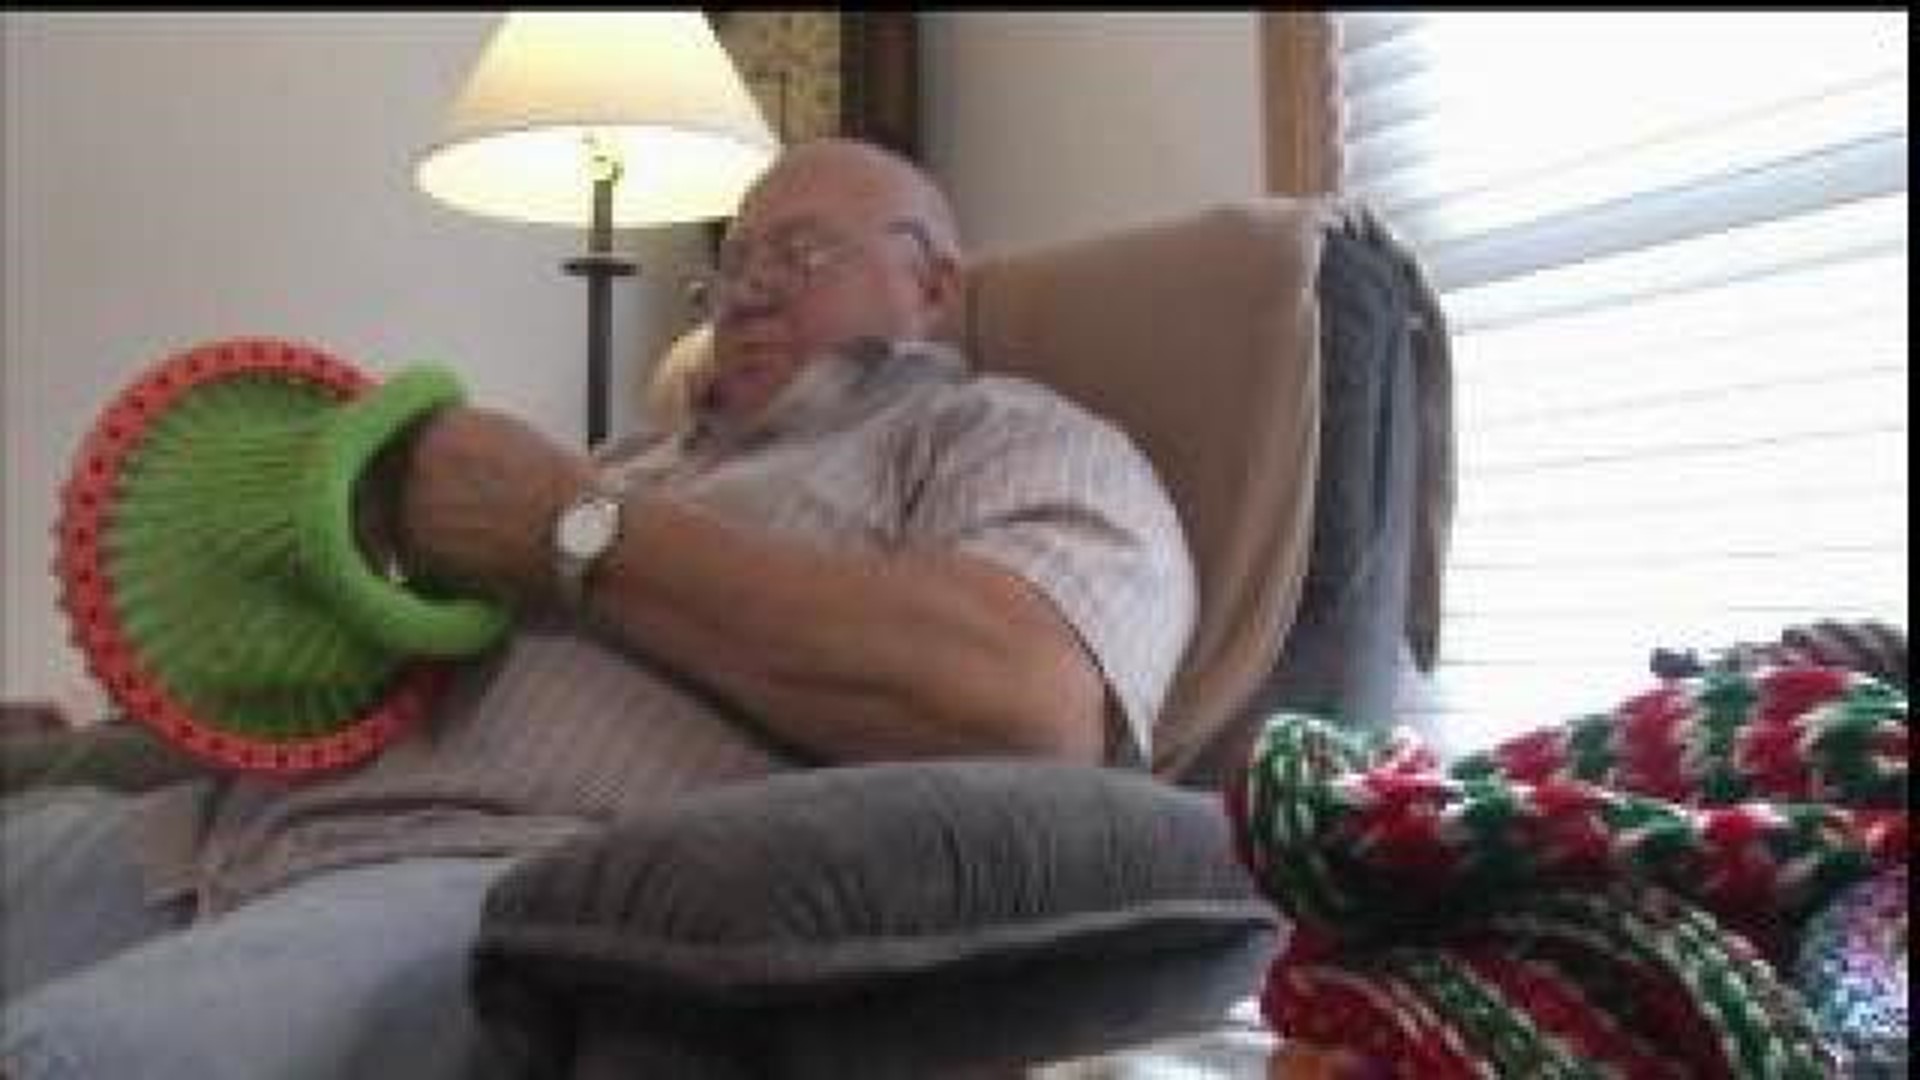 Iowa man knits hundreds of hats for charity